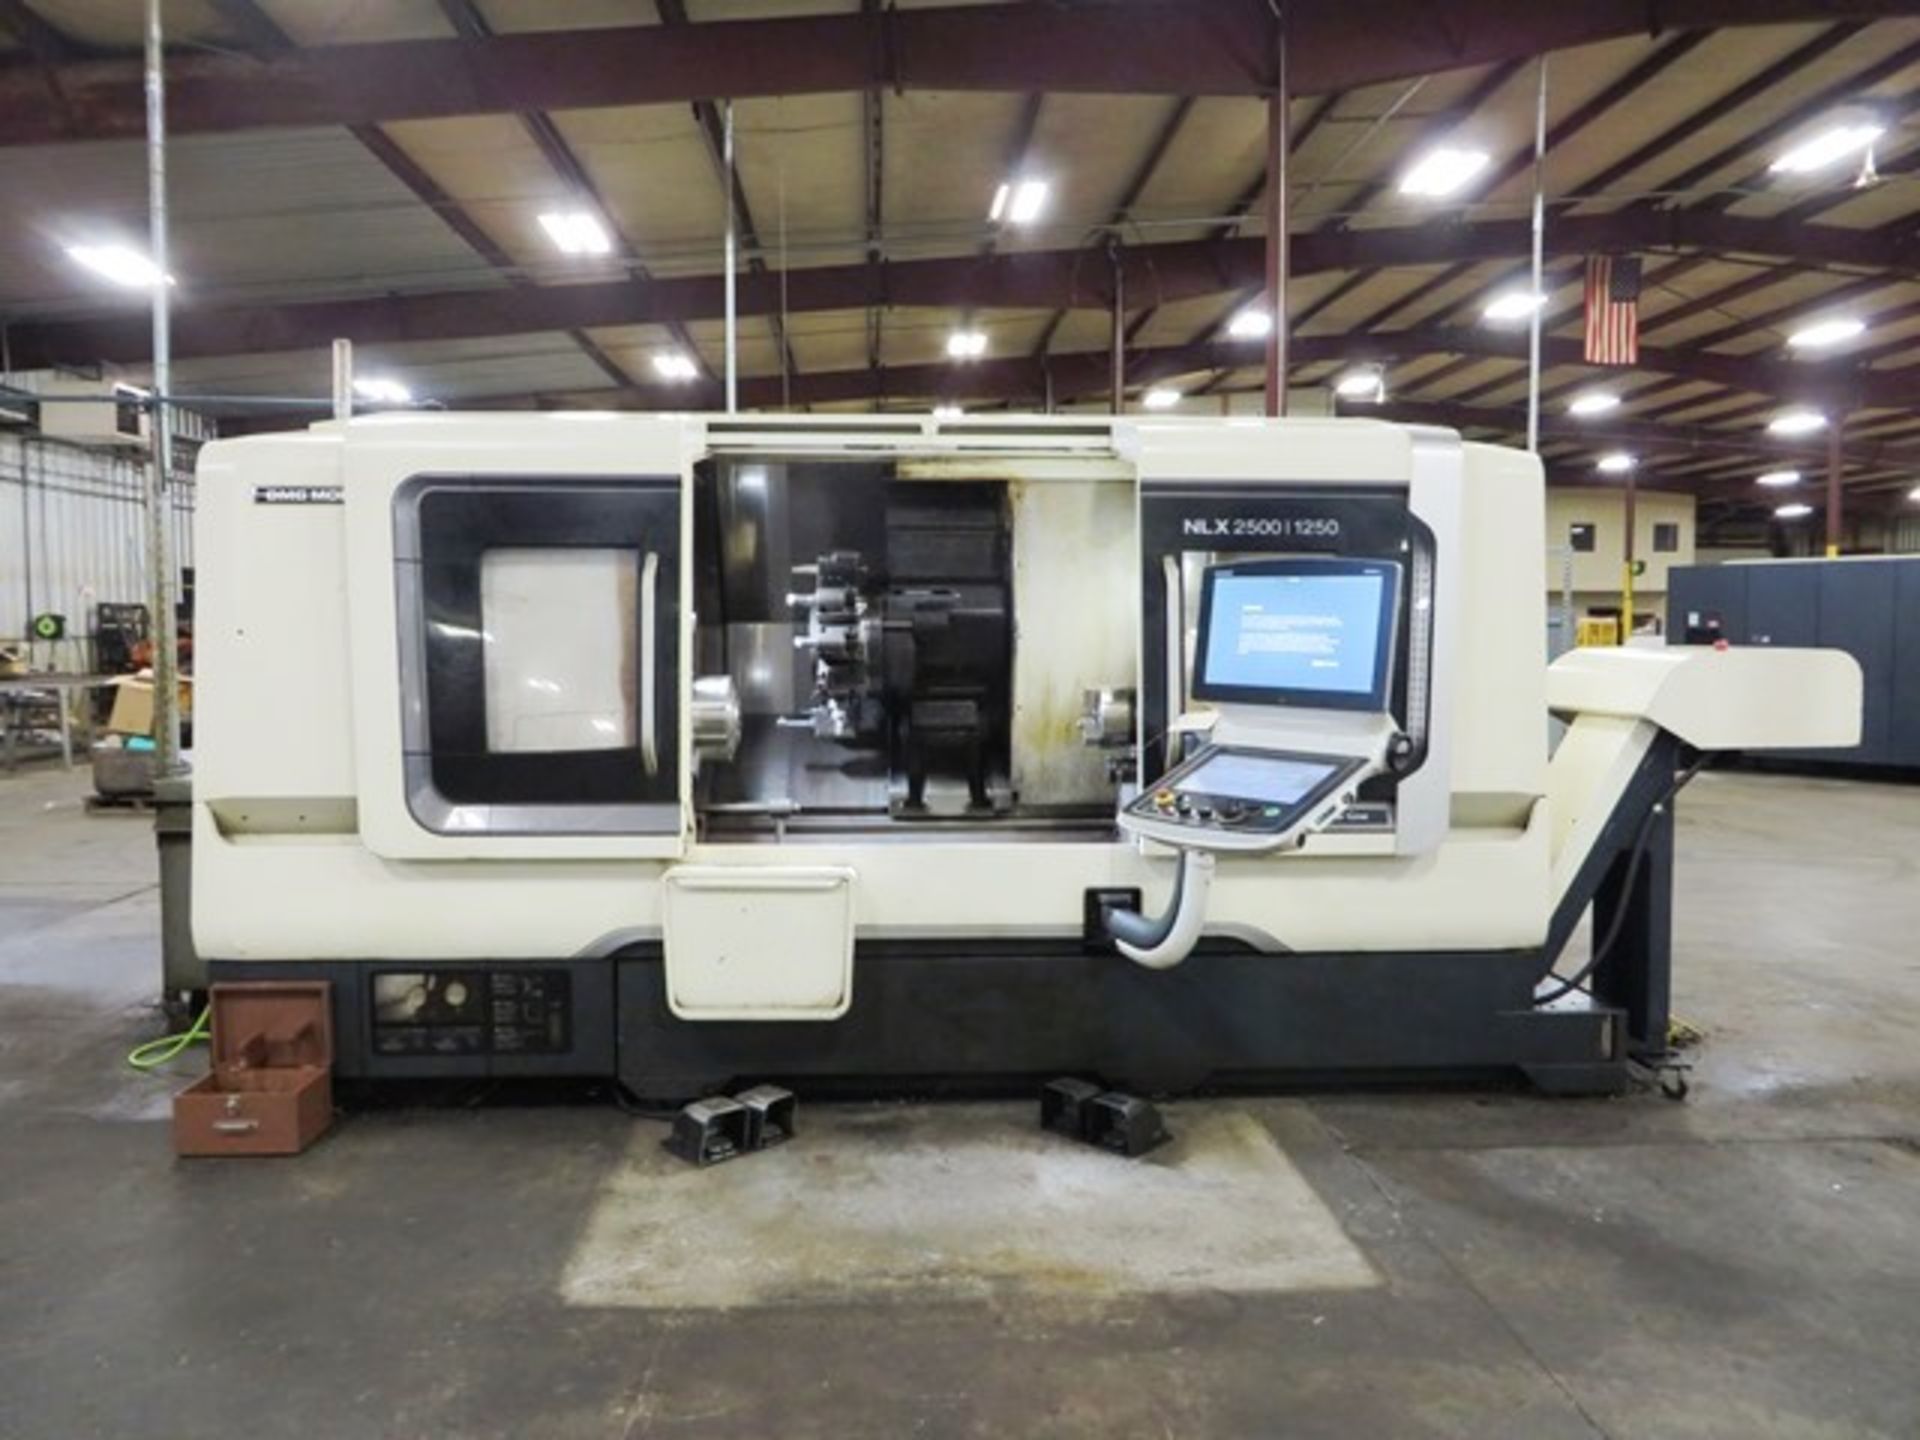 DMG Mori NLX2500/1250 CNC Turning Center with Collet Chuck, Main Spindle 8'' 3-Jaw Chuck, Sub